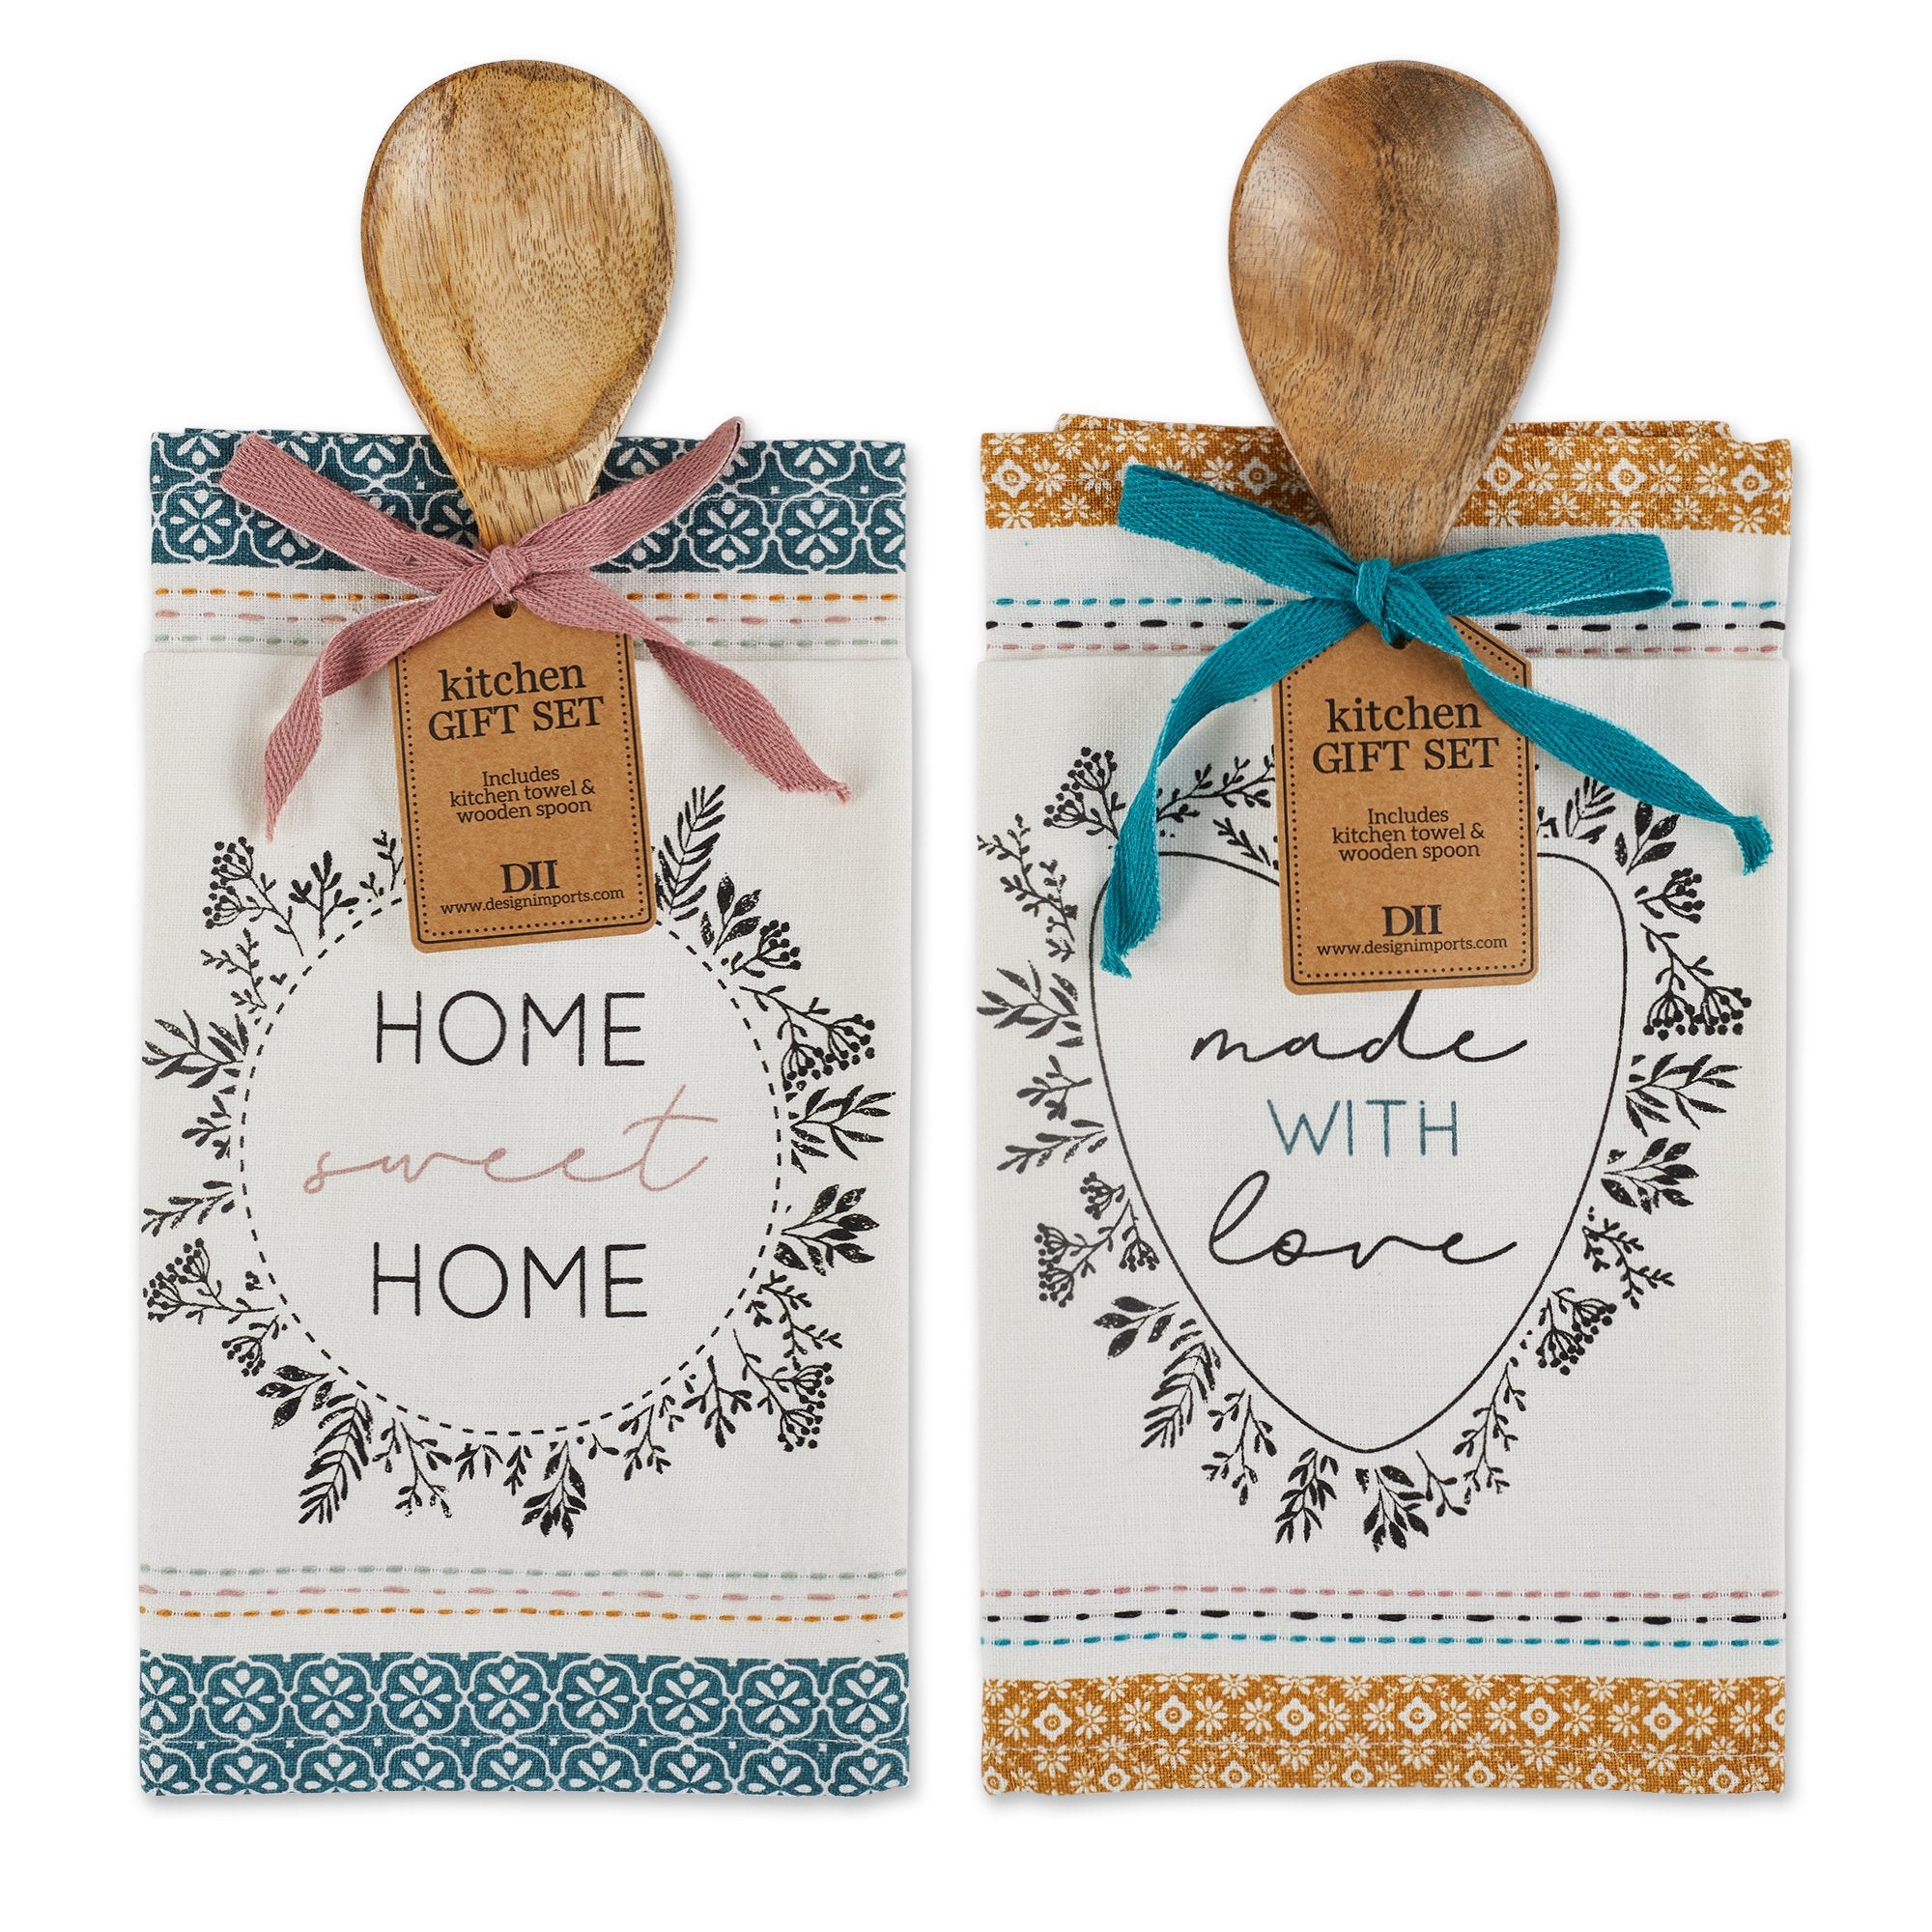 Wholesale Lovely Home Dt + Spoon Gift Set Mixed Pack – DII Design